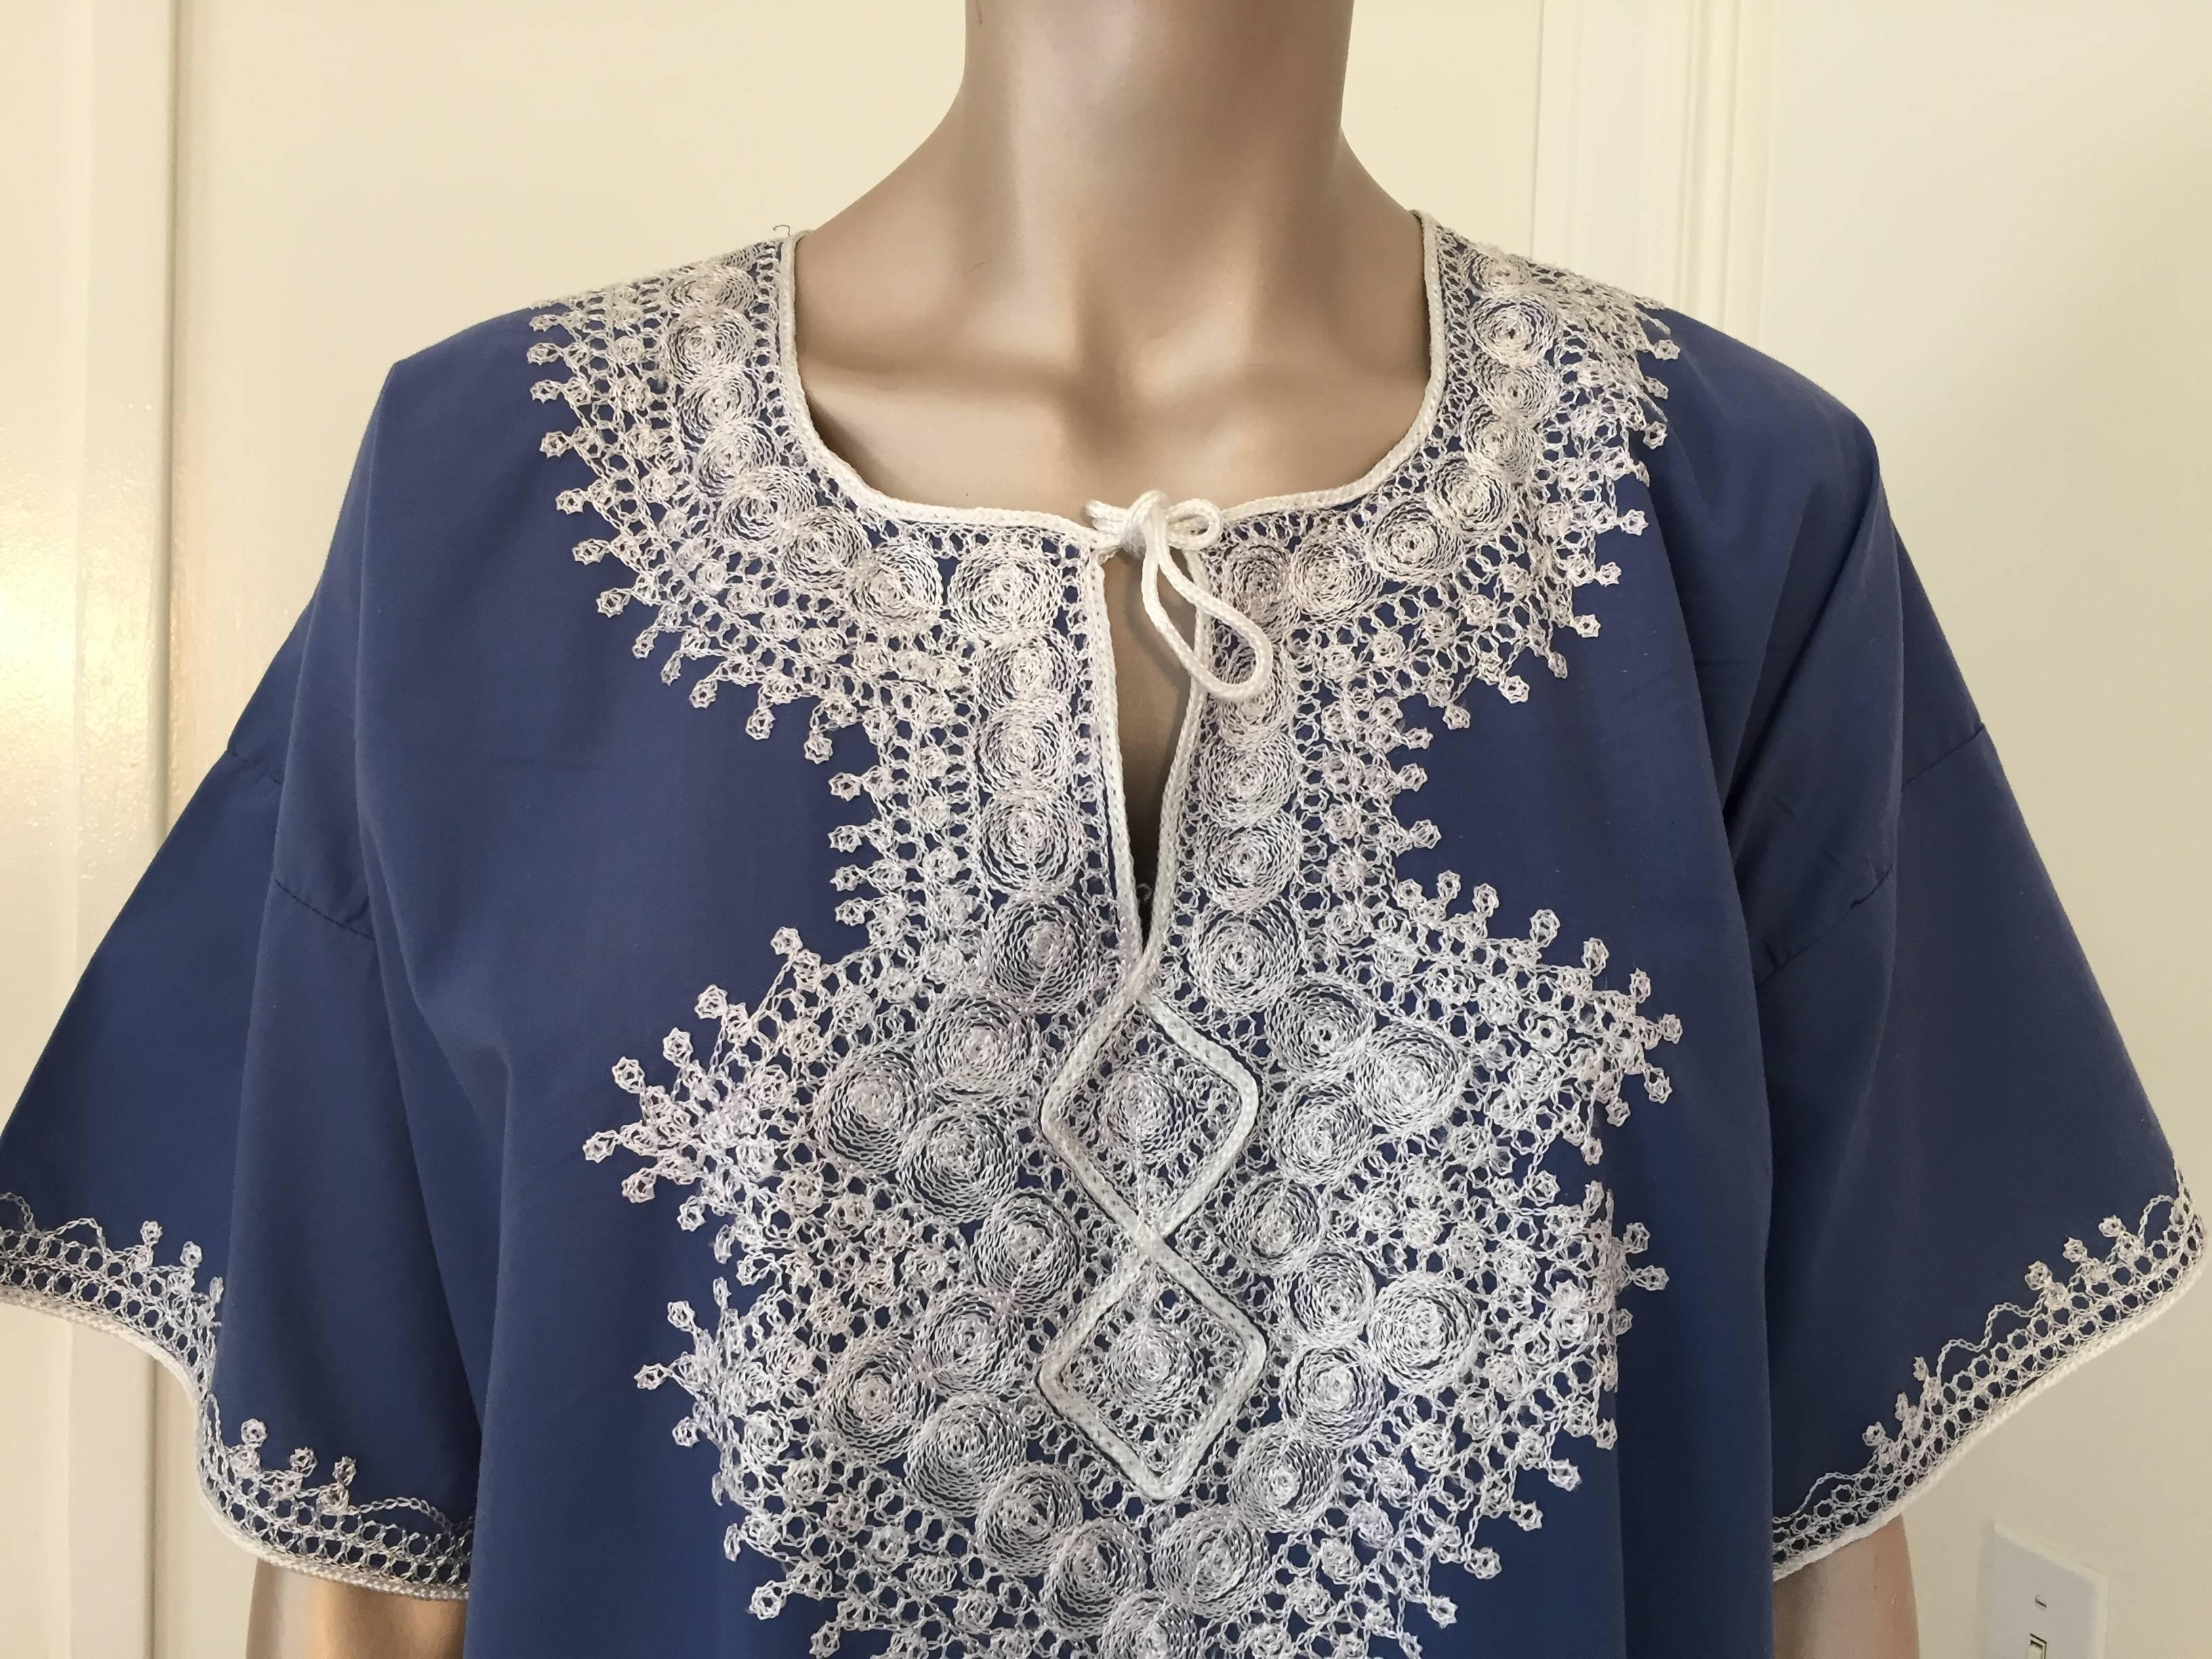 Bohemian Moroccan caftan blue color embroidered with white threads.
circa 1980s.
This long maxi dress cotton summer kaftan is embroidered with traditional Moorish designs.
The kaftan features a traditional neckline, with side slits and embellished